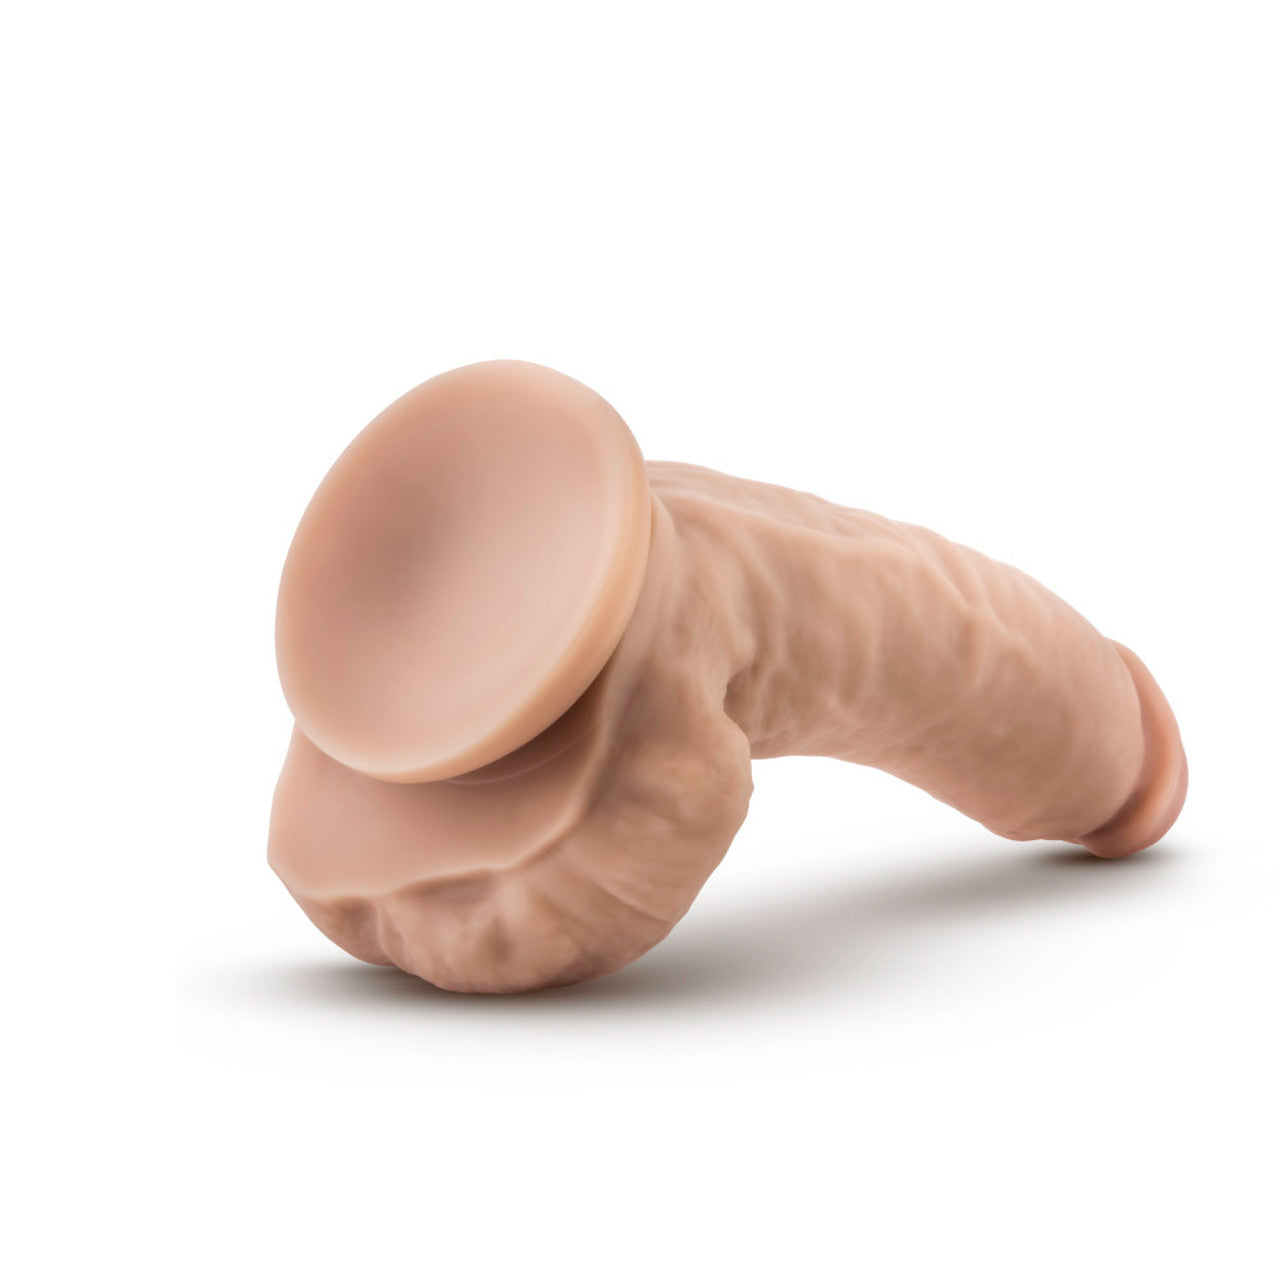 Mr. Mayor 9 Inch Dildo with Balls - Beige - Thorn & Feather